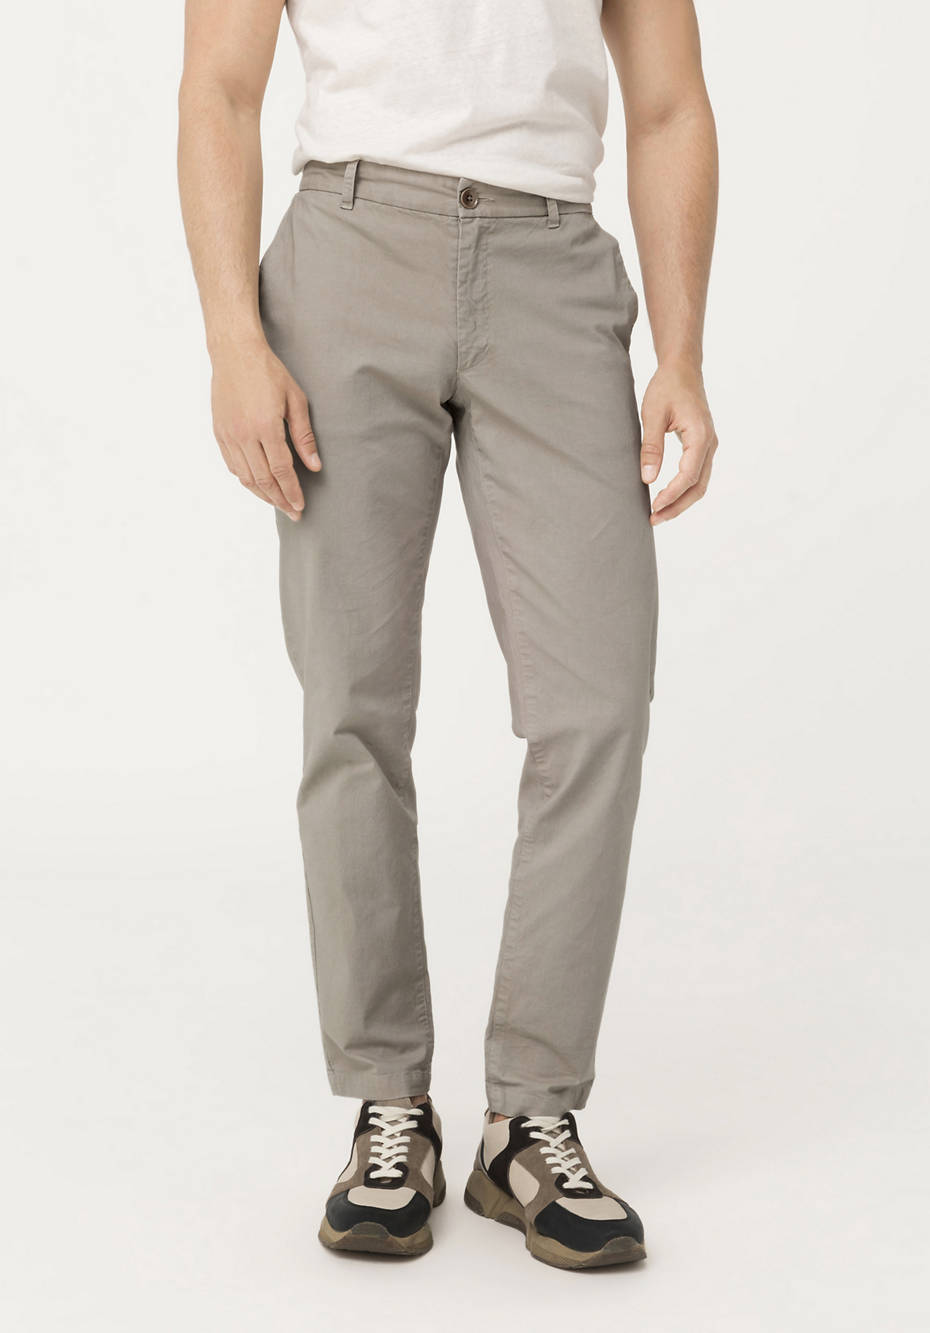 Modern fit chinos made of organic cotton with hemp